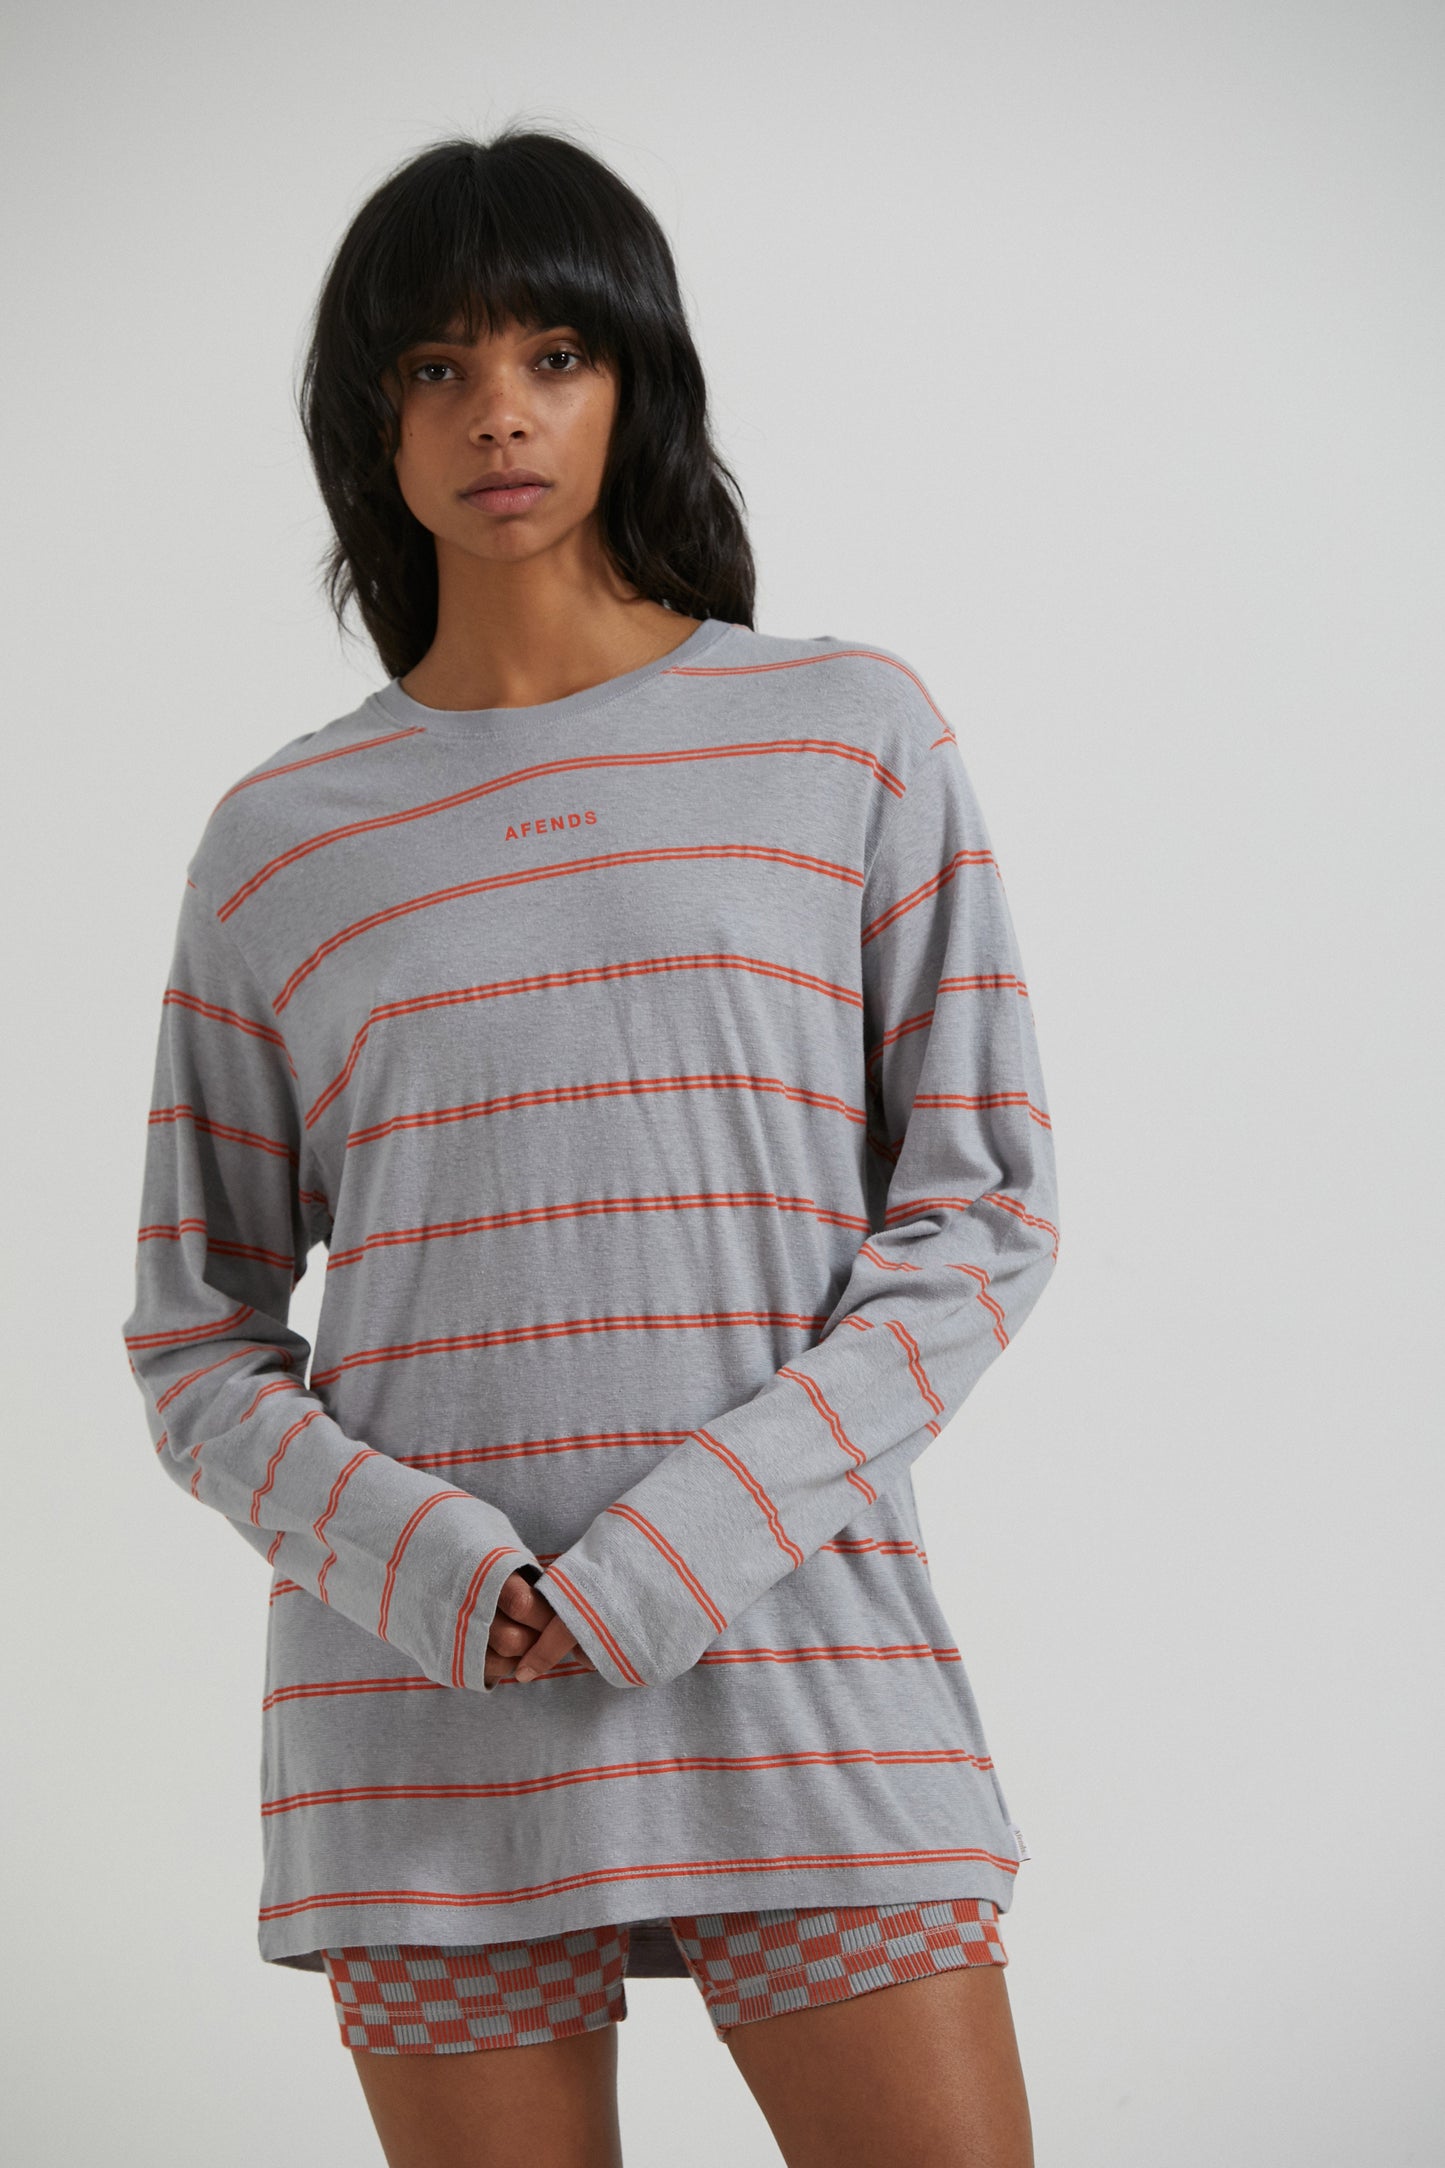 Afends Interlude Recycled Striped LS T-Shirt GREY